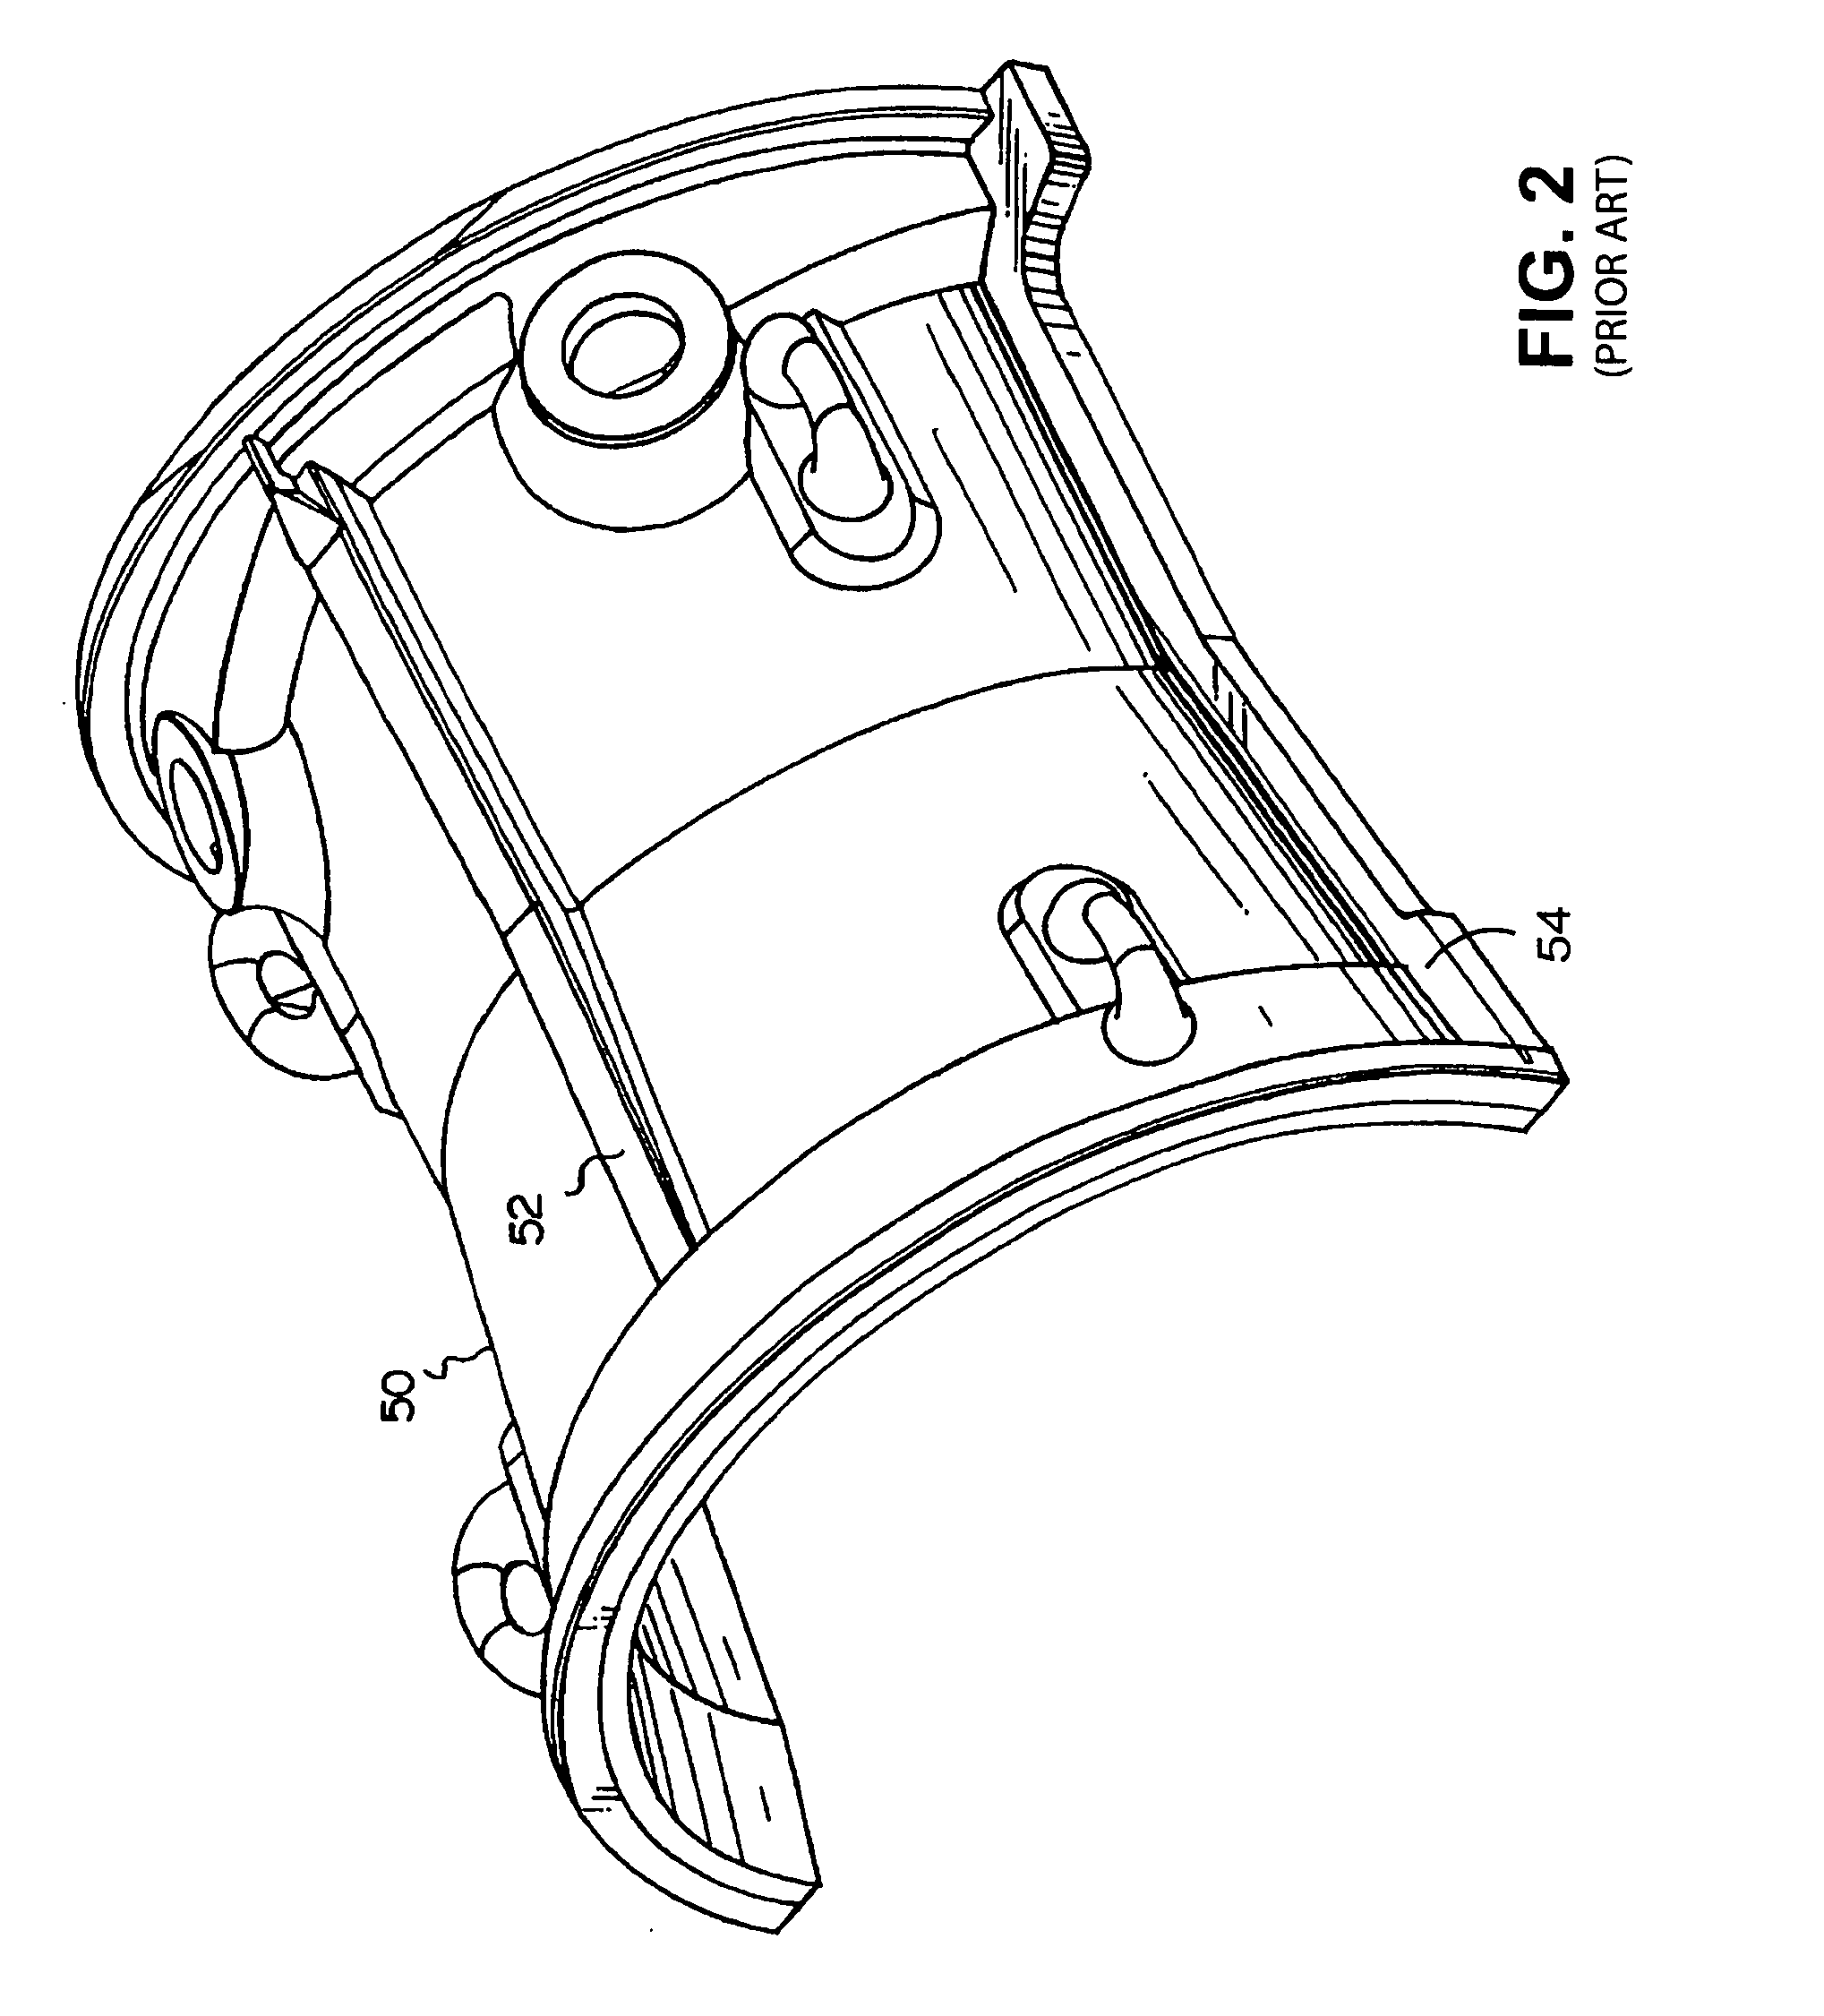 Method and apparatus for matching the thermal mass and stiffness of bolted split rings